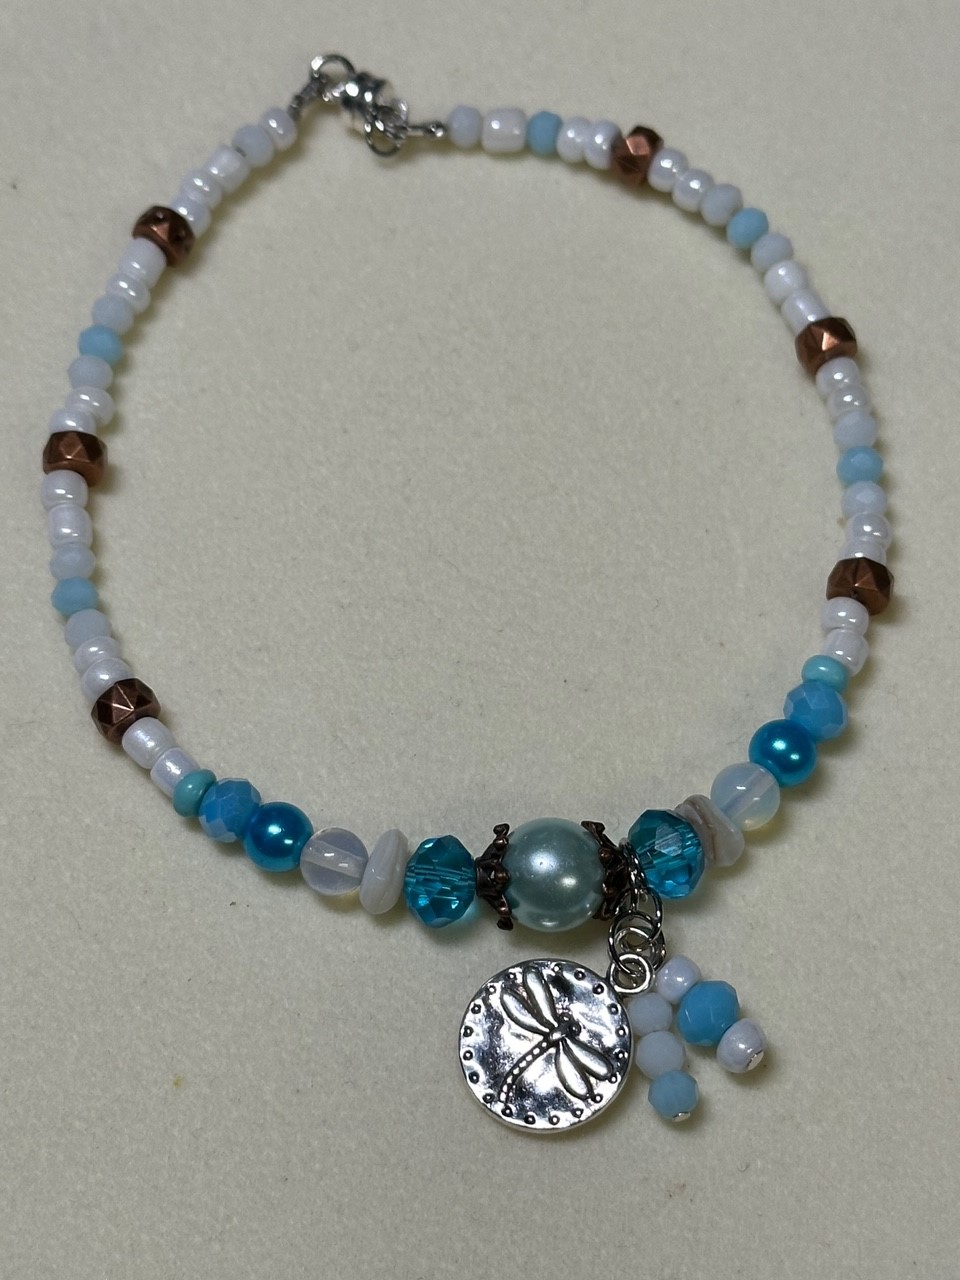 Anklet with a variety of different colored beads. There is a small charm in the middle of a dragonfly